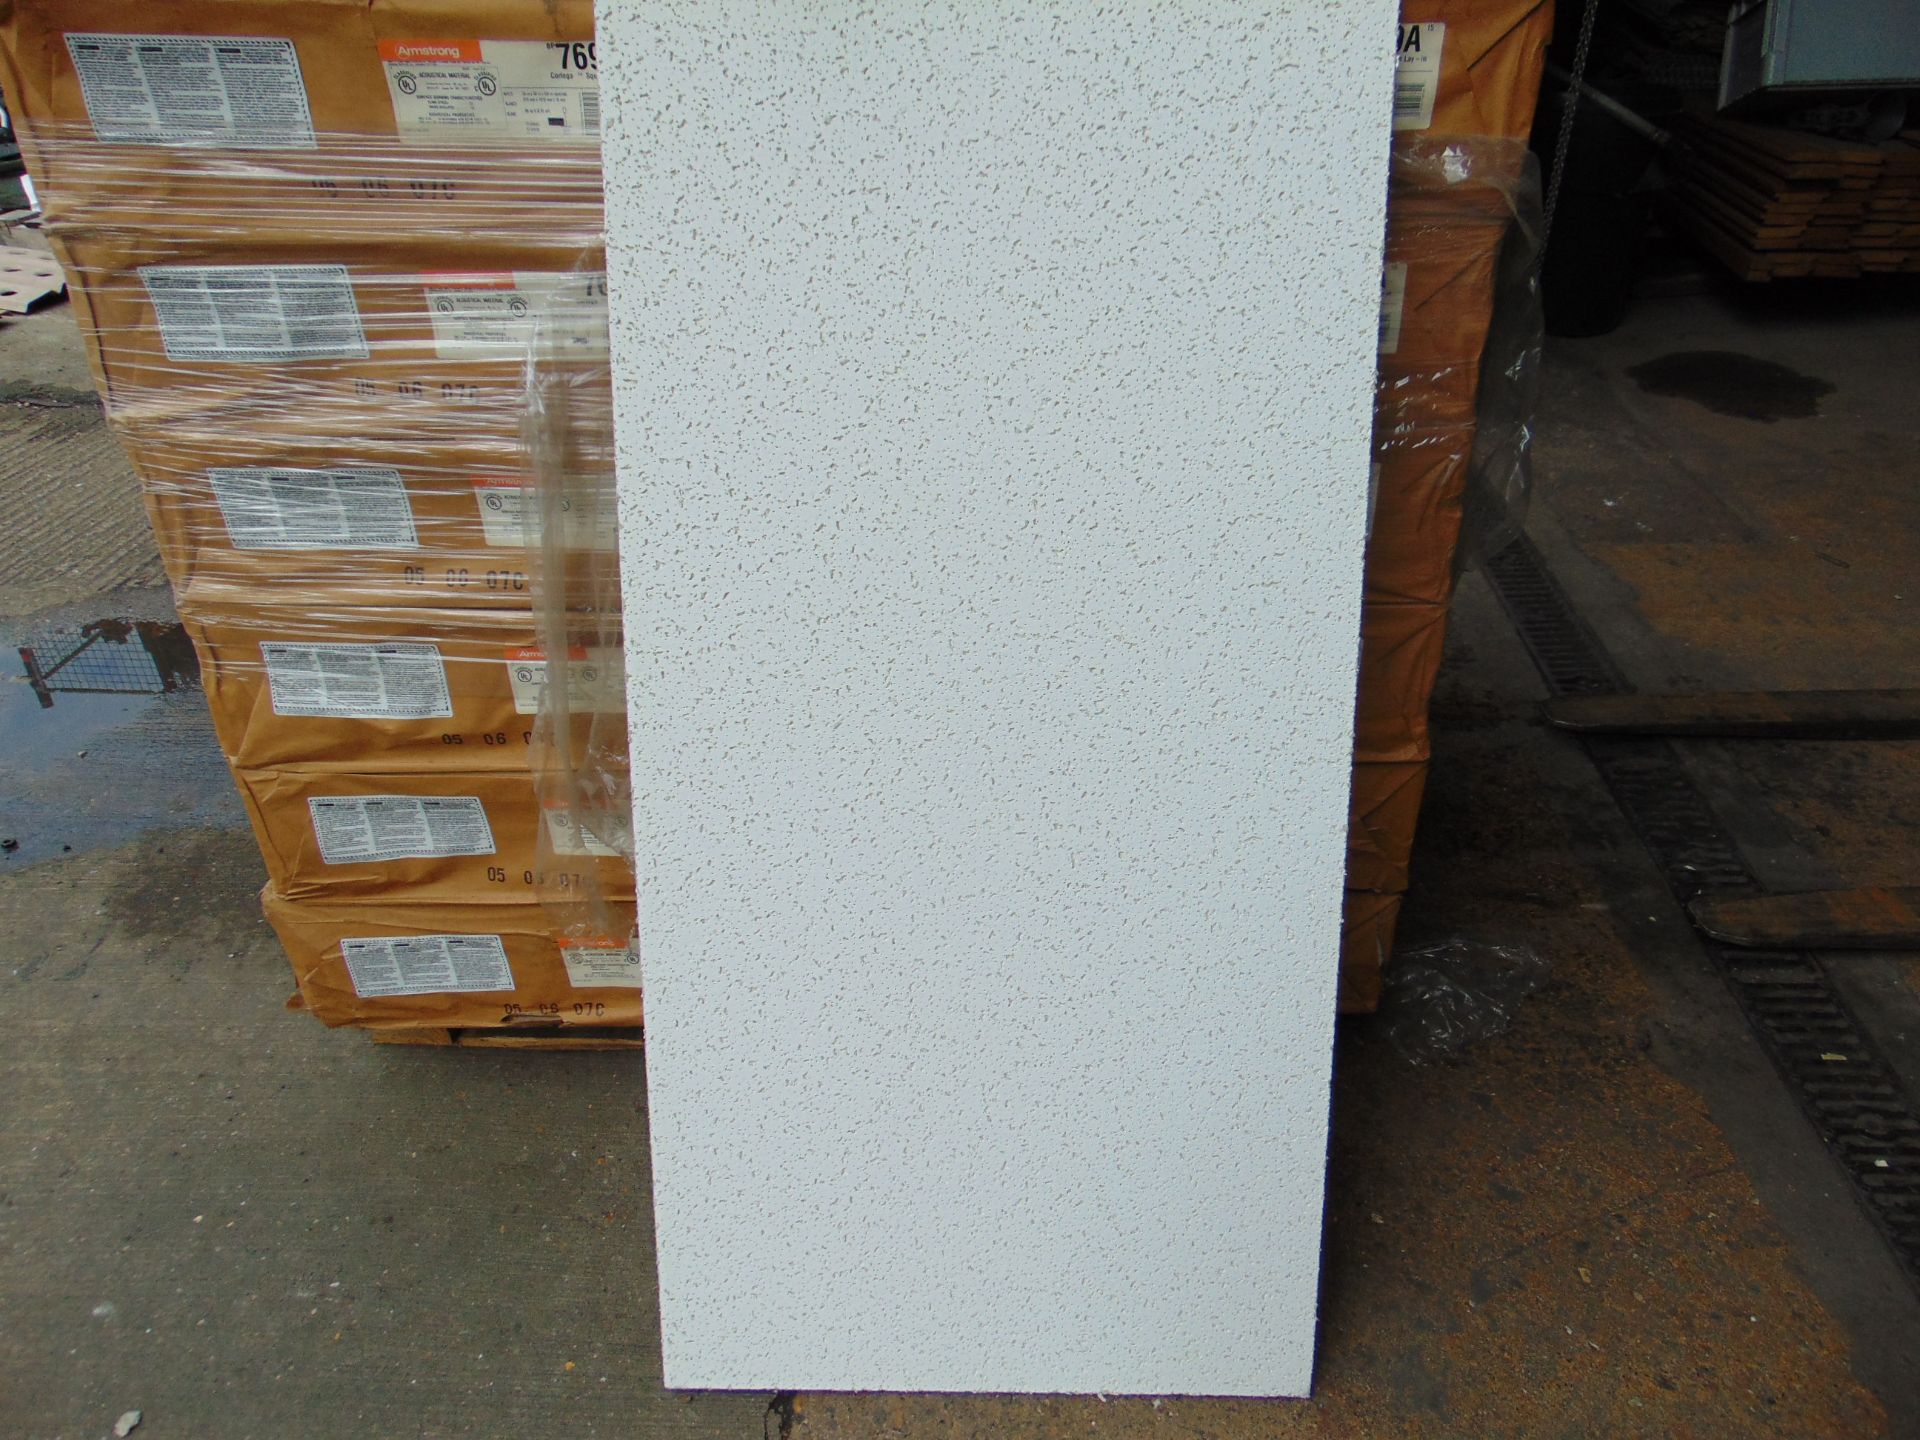 24in x 48in x 5/8 Acoustic Panels for Ceilings, Walls etc 192 Sheets (1536 SQ.Ft) - Image 2 of 5